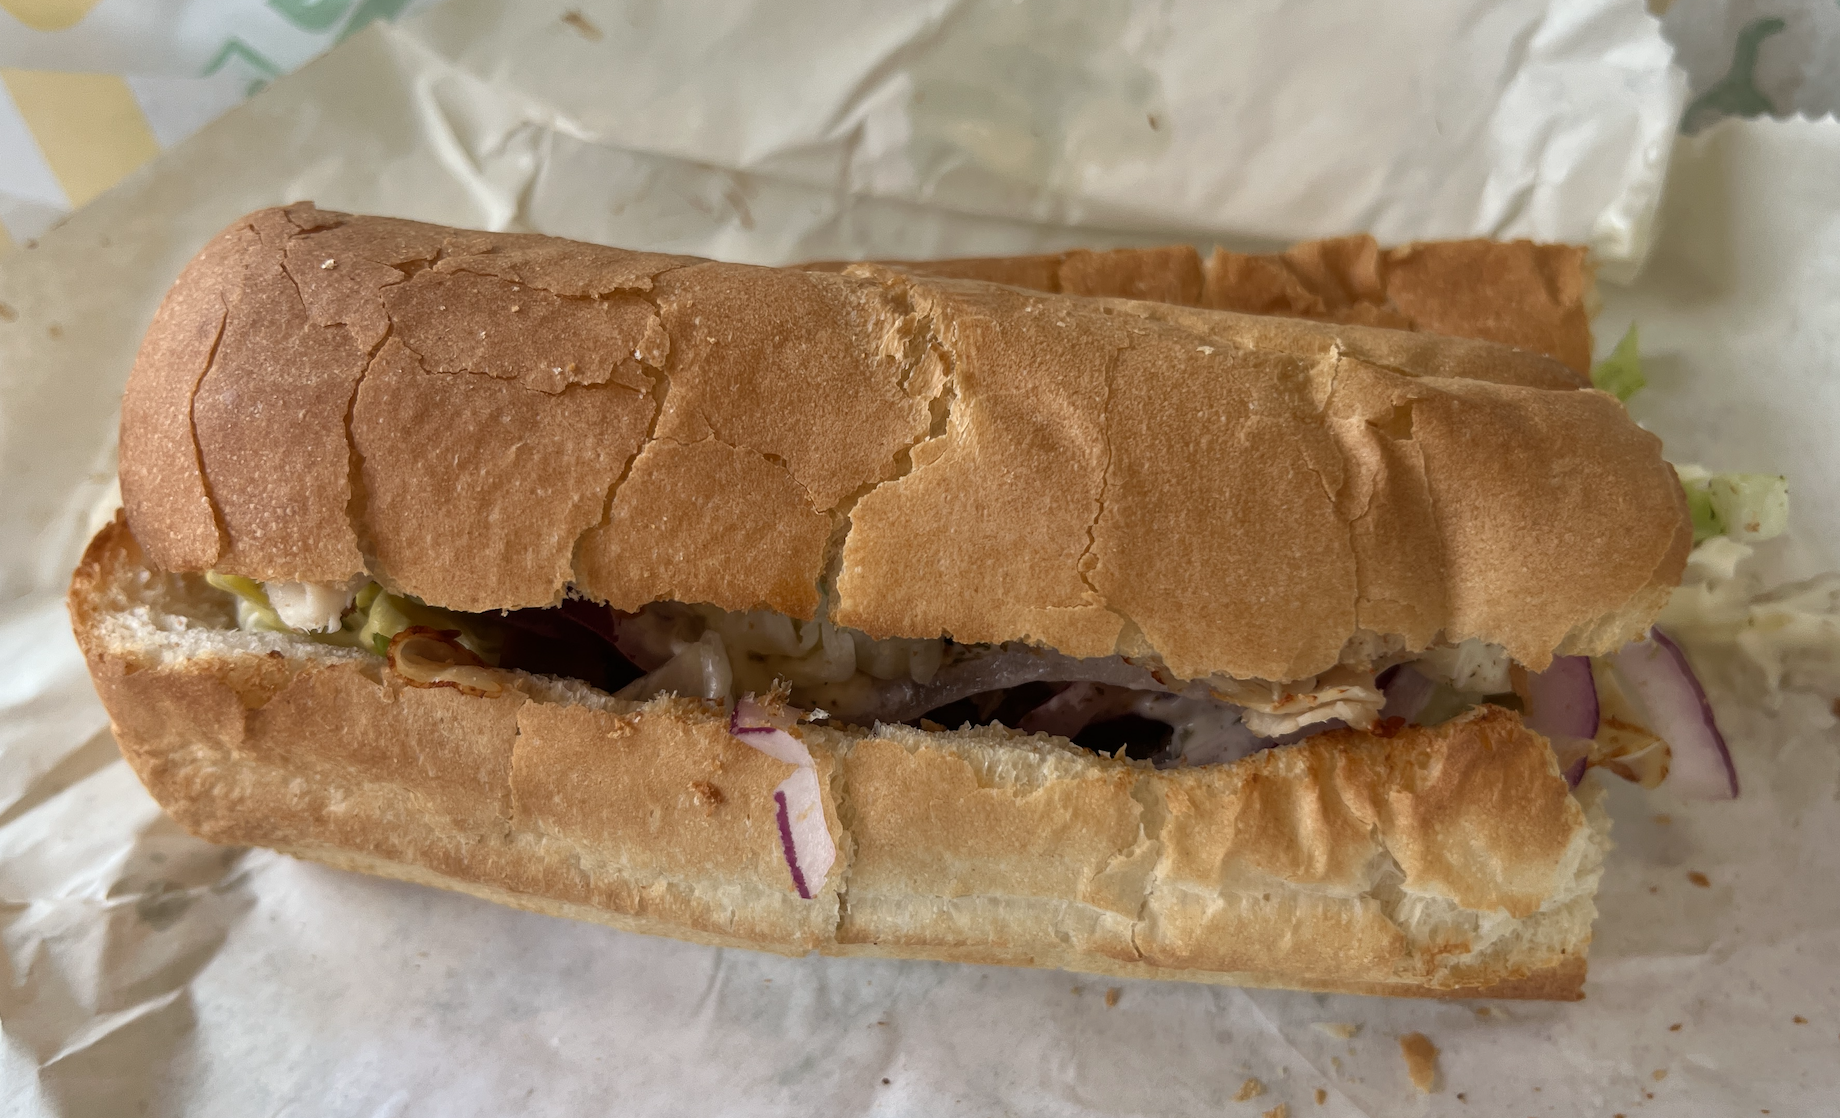 Subway is making a big change to its meats